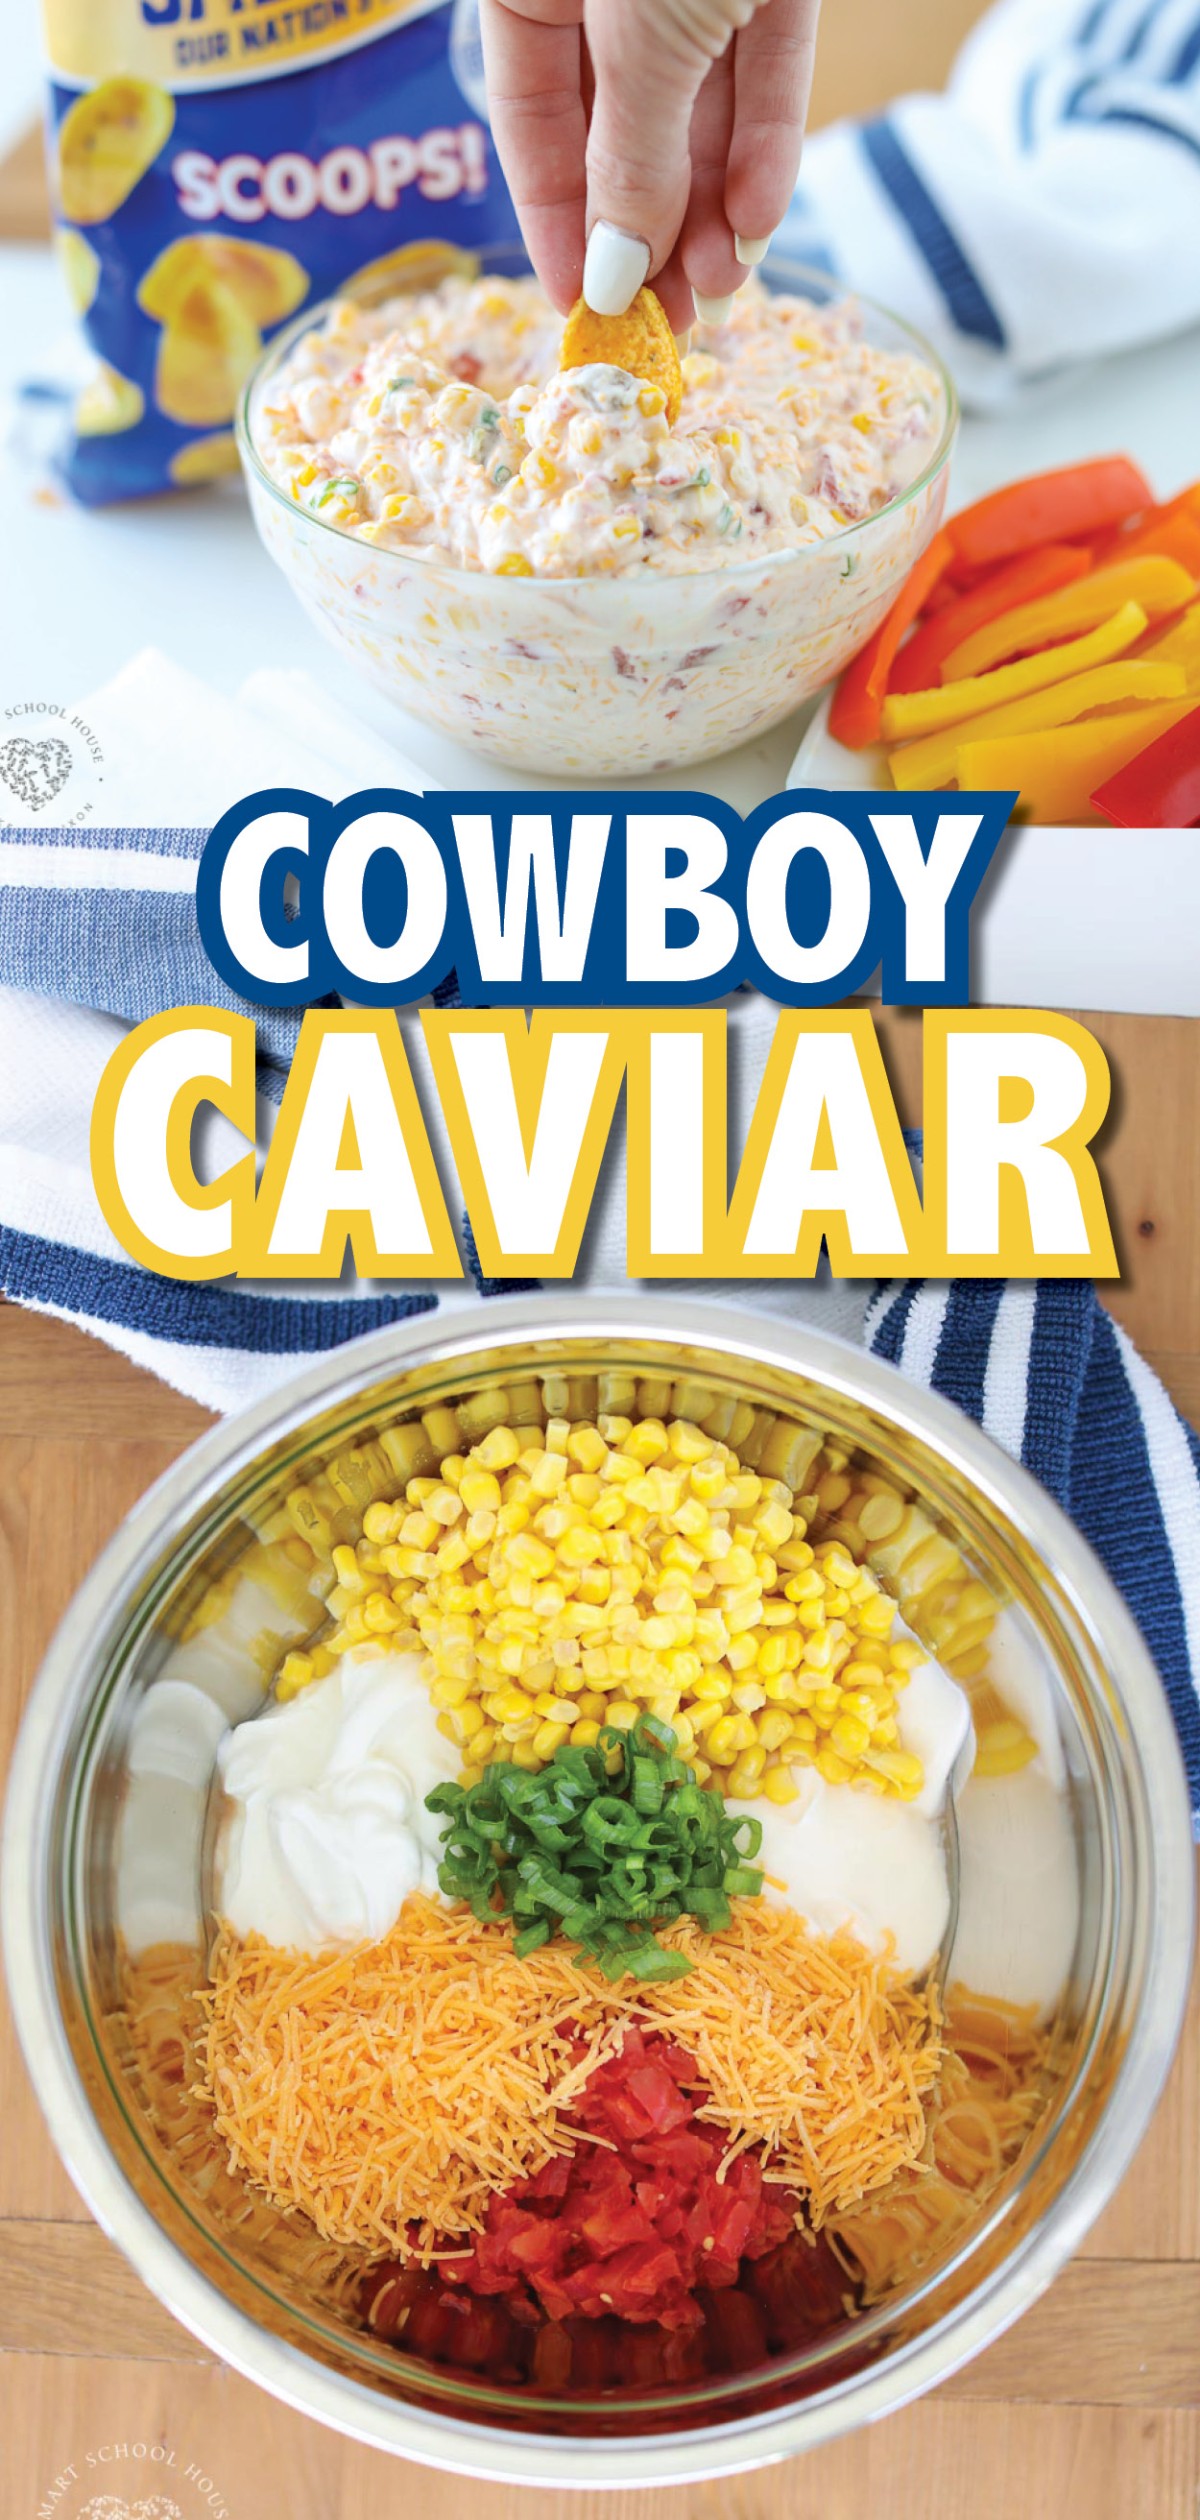 Creamy Cowboy Caviar is a fresh, flavorful dip that is perfect for any picnic, potluck, or party, and is made in under 15 minutes!